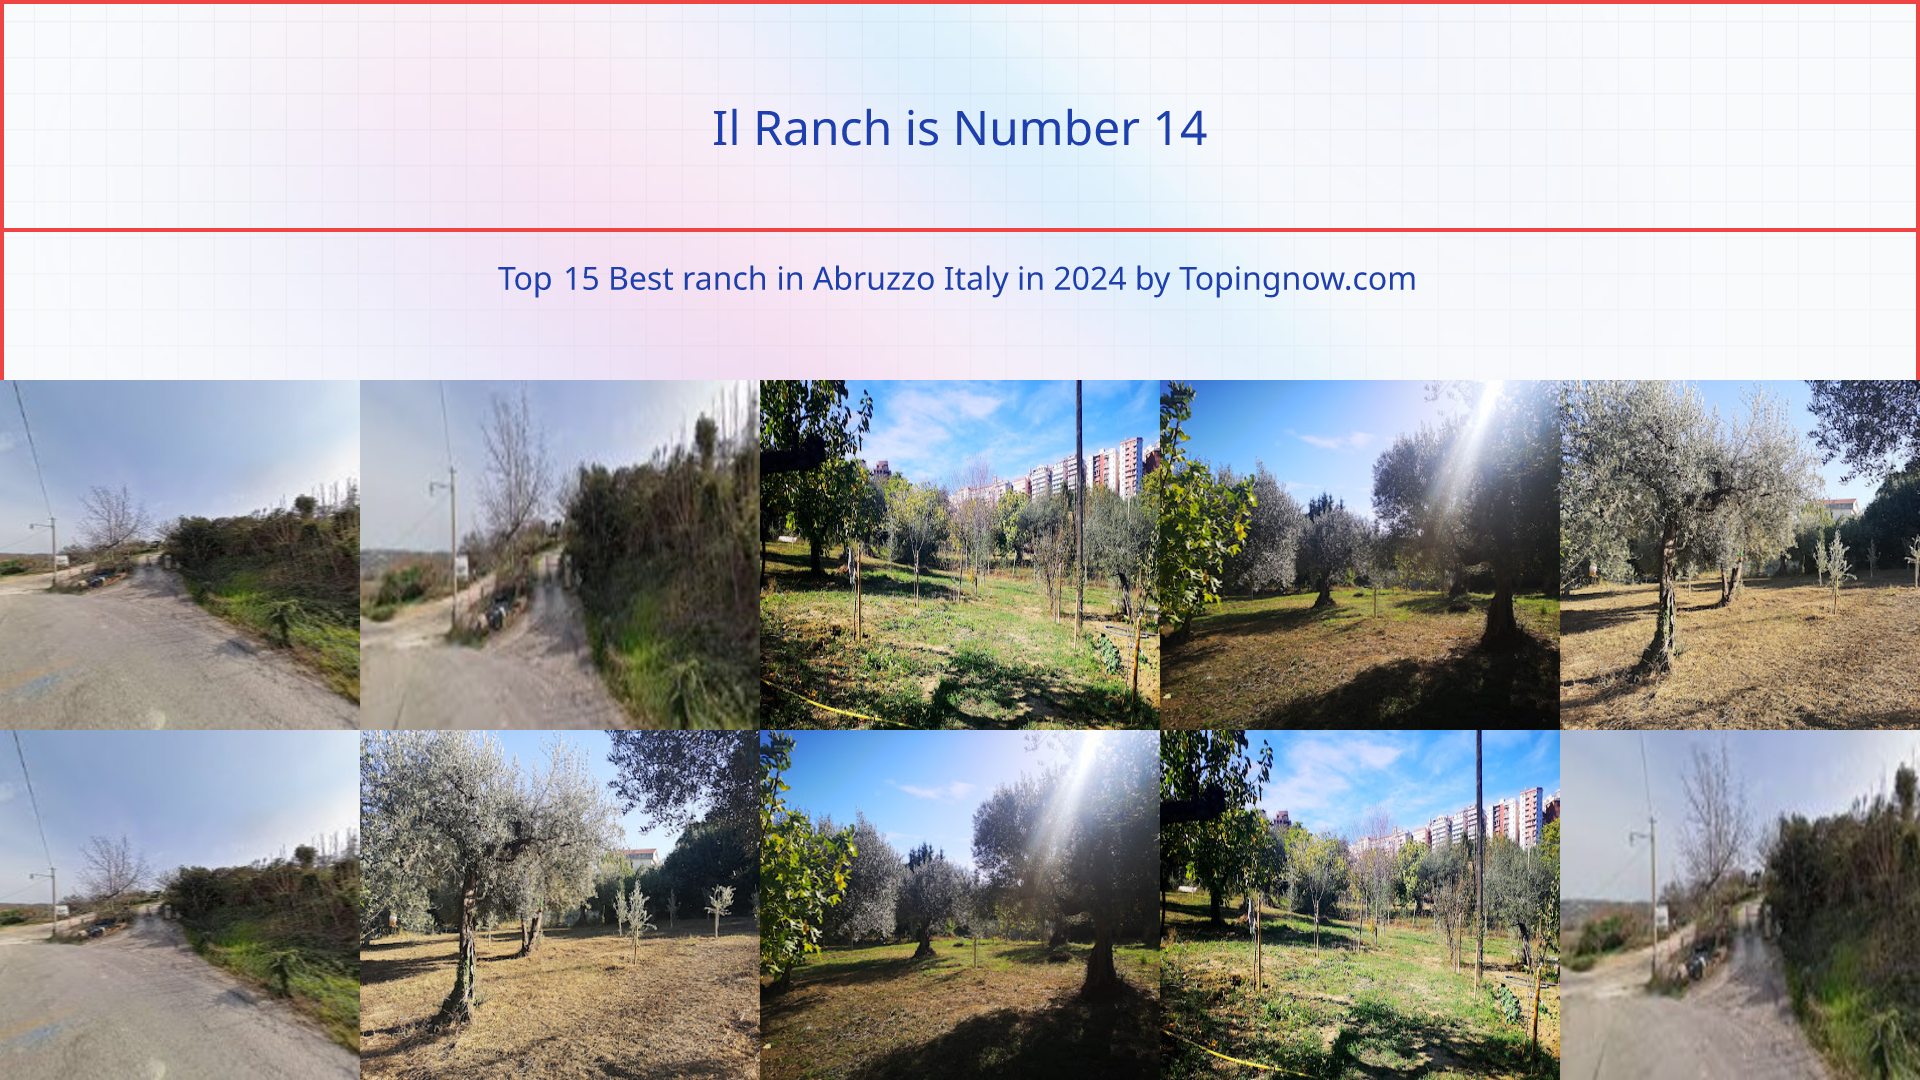 Il Ranch: Top 15 Best ranch in Abruzzo Italy in 2024